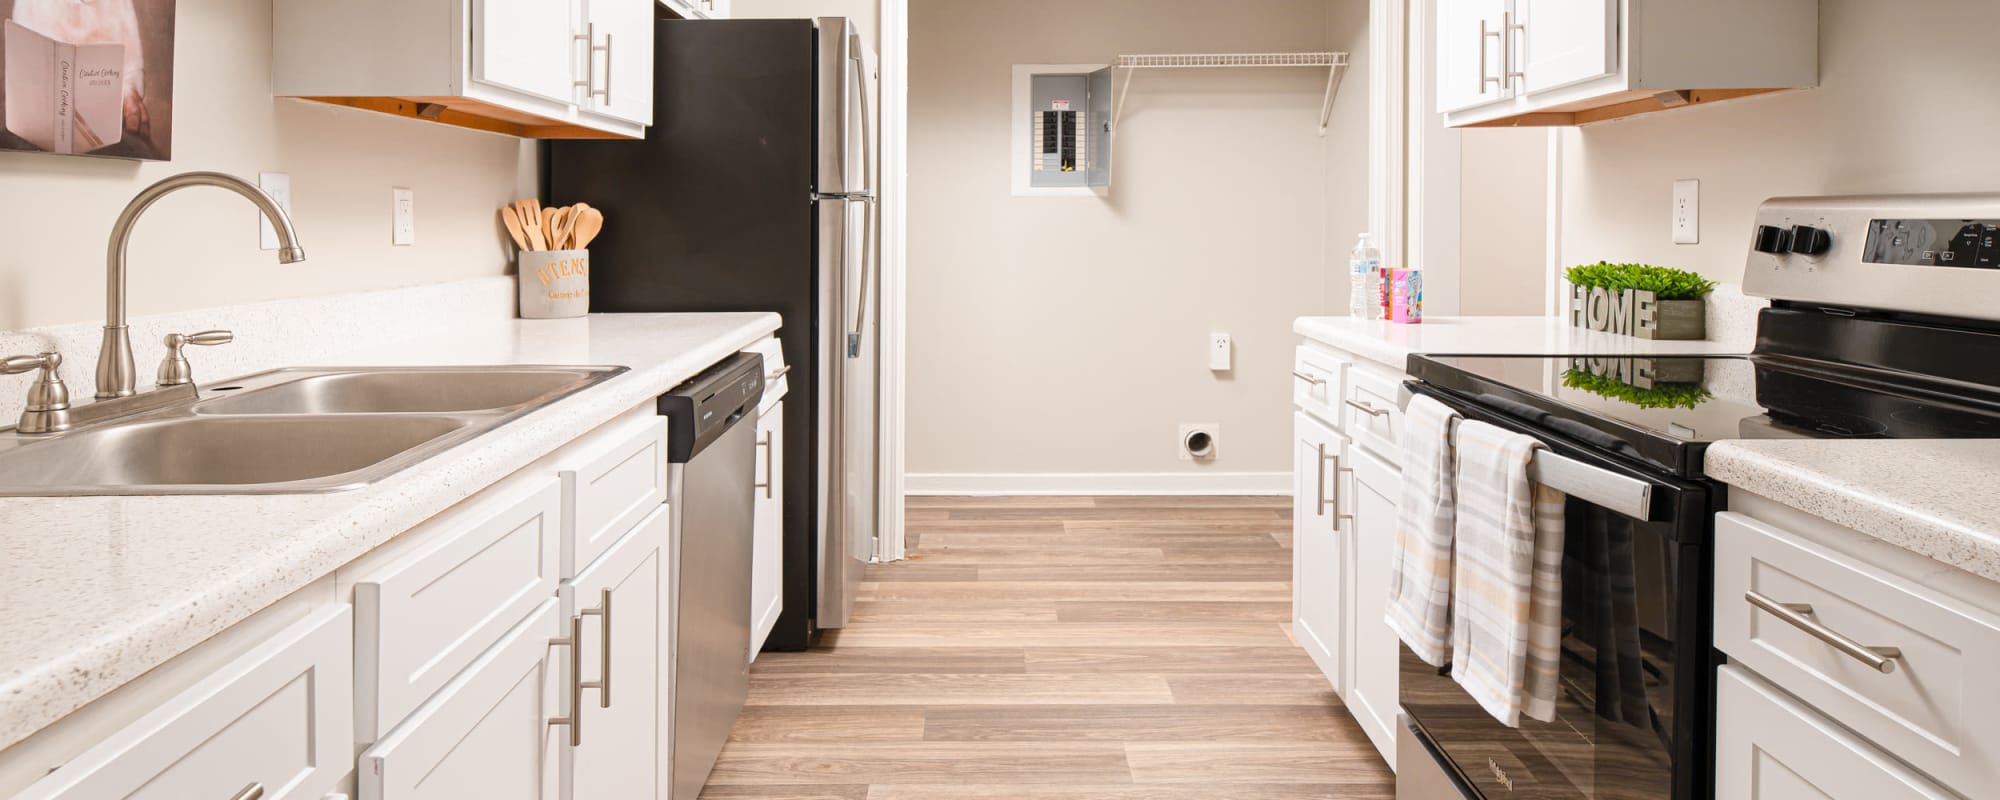 Spacious kitchen with wood flooring and white cabinetry at Bradford Place Apartments in Byram, Mississippi